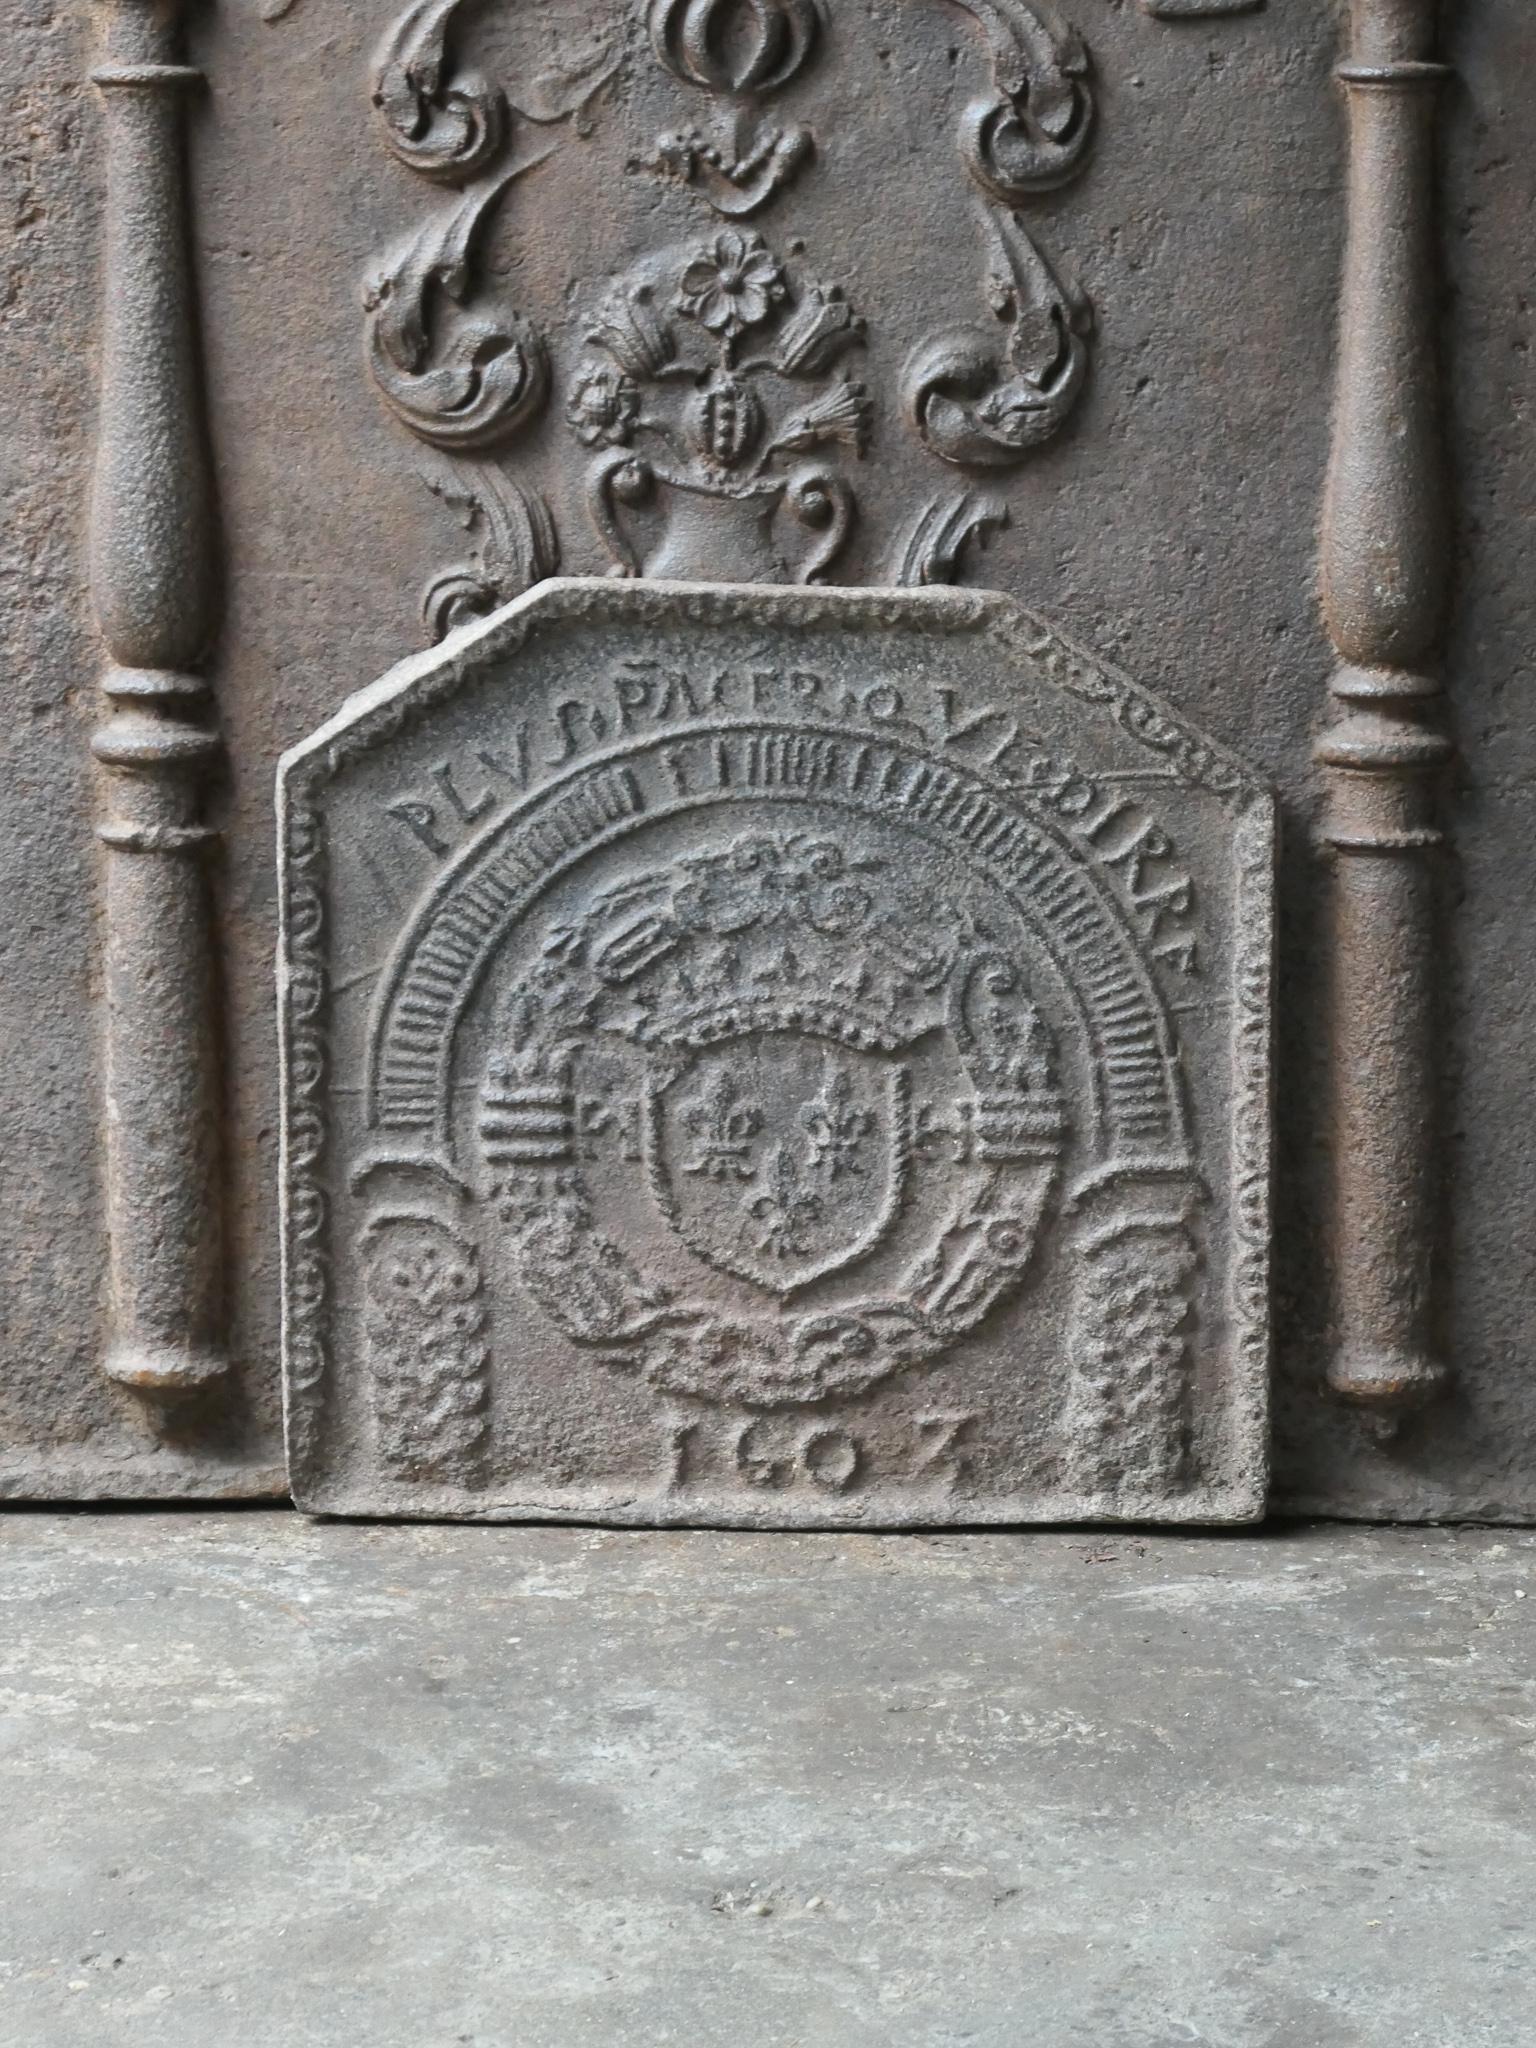 17th century French Rennaisance fireback with the arms of France. This is the coat of arms of the House of Bourbon, an originally French royal house that became a major dynasty in Europe. It delivered kings for Spain (Navarra), France, both Sicilies